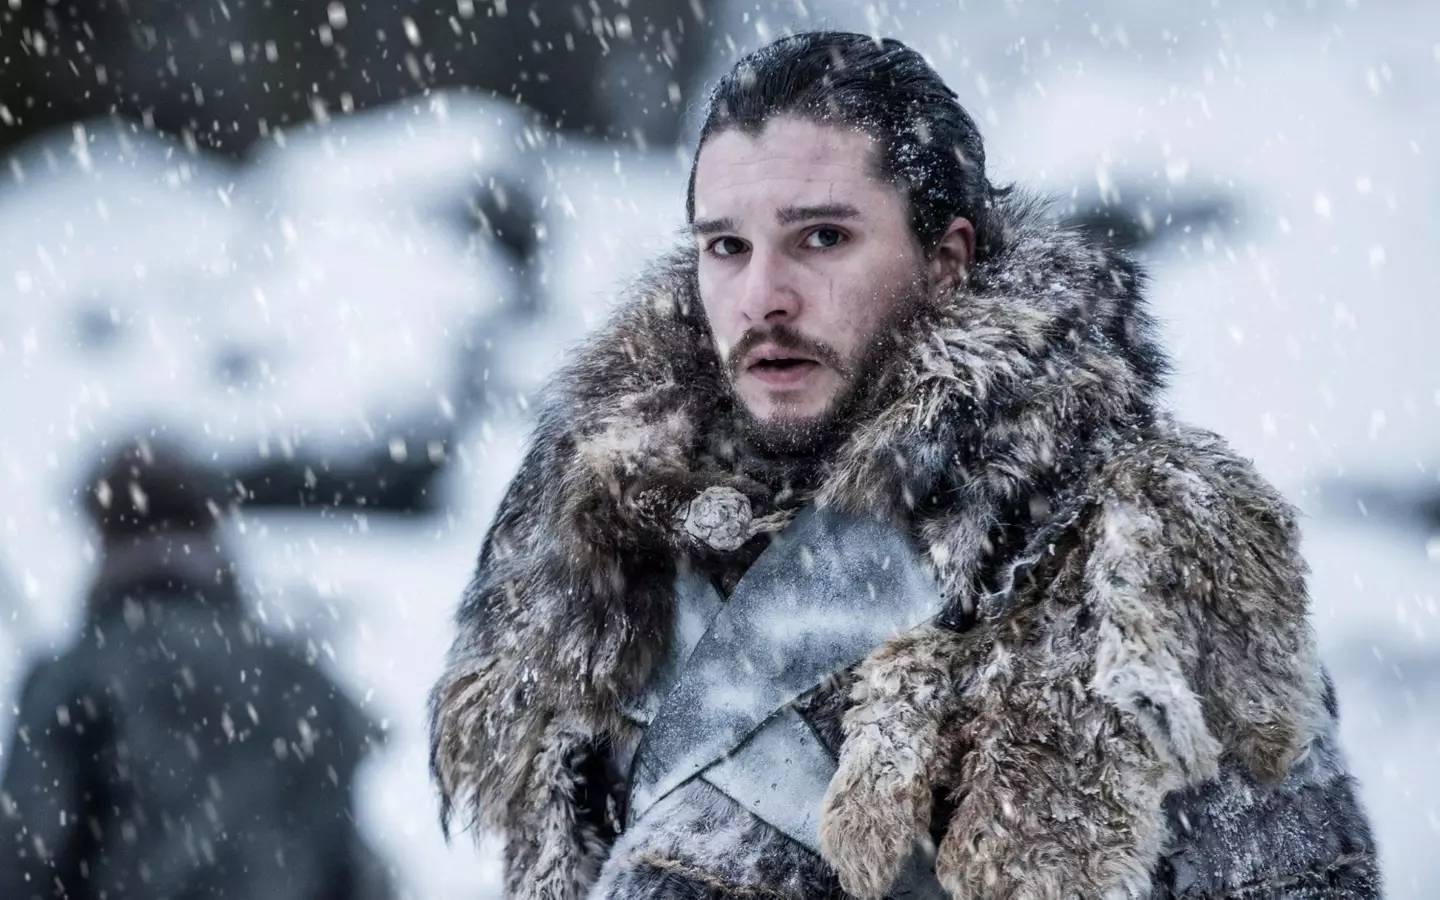 Last time we saw Jon Snow he was riding into a snowy wilderness with his wildling friends.